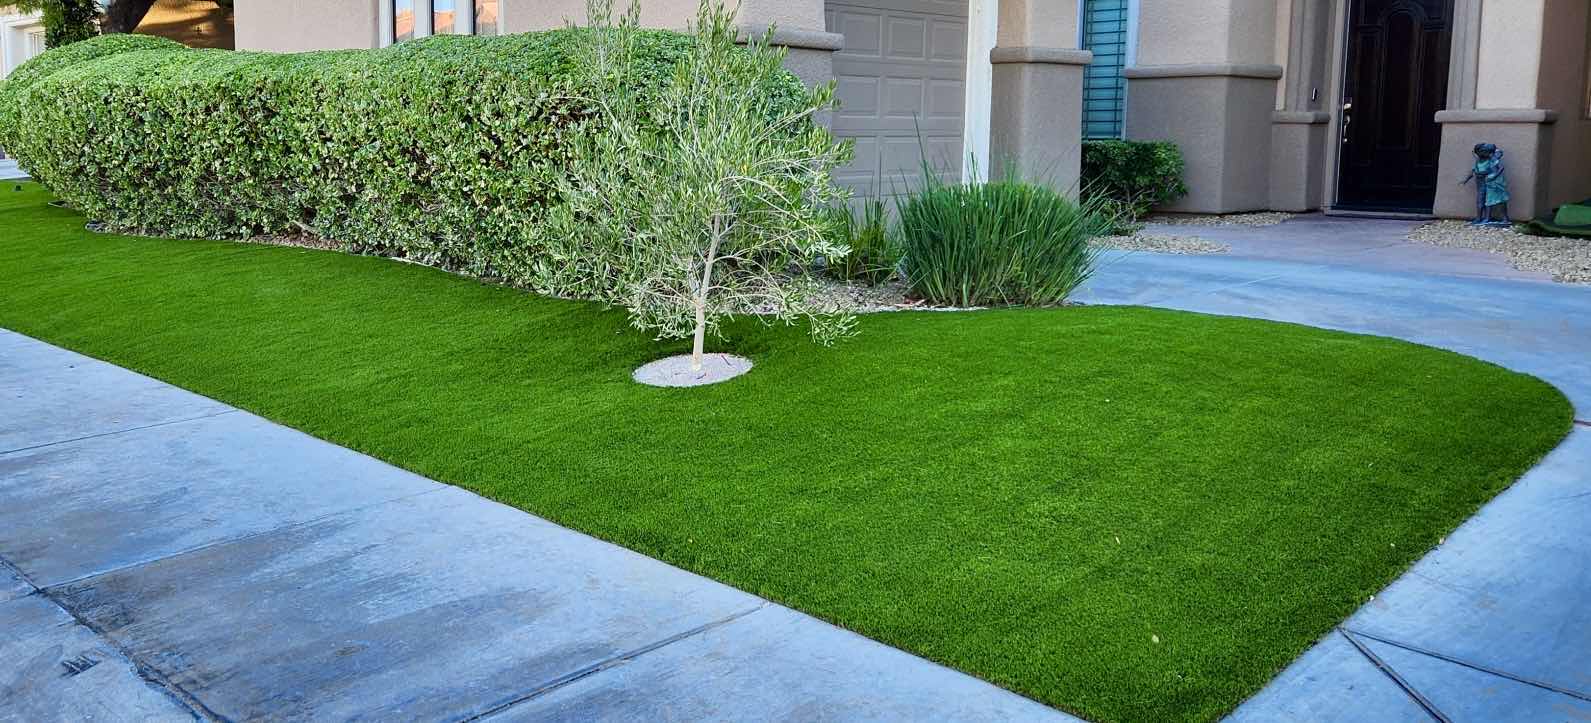 Photo 1 of SUPREME PREMIUM QUALITY ARTIFICIAL TURF GRASS 15’ X 100’ (1500 TOTAL SQ FT) ANTHEM COUNTRY CLUB APPROVED TOTAL TURF HEIGHT 1.97” (((pick-up Sun 5/26 AND Mon 5/27)))